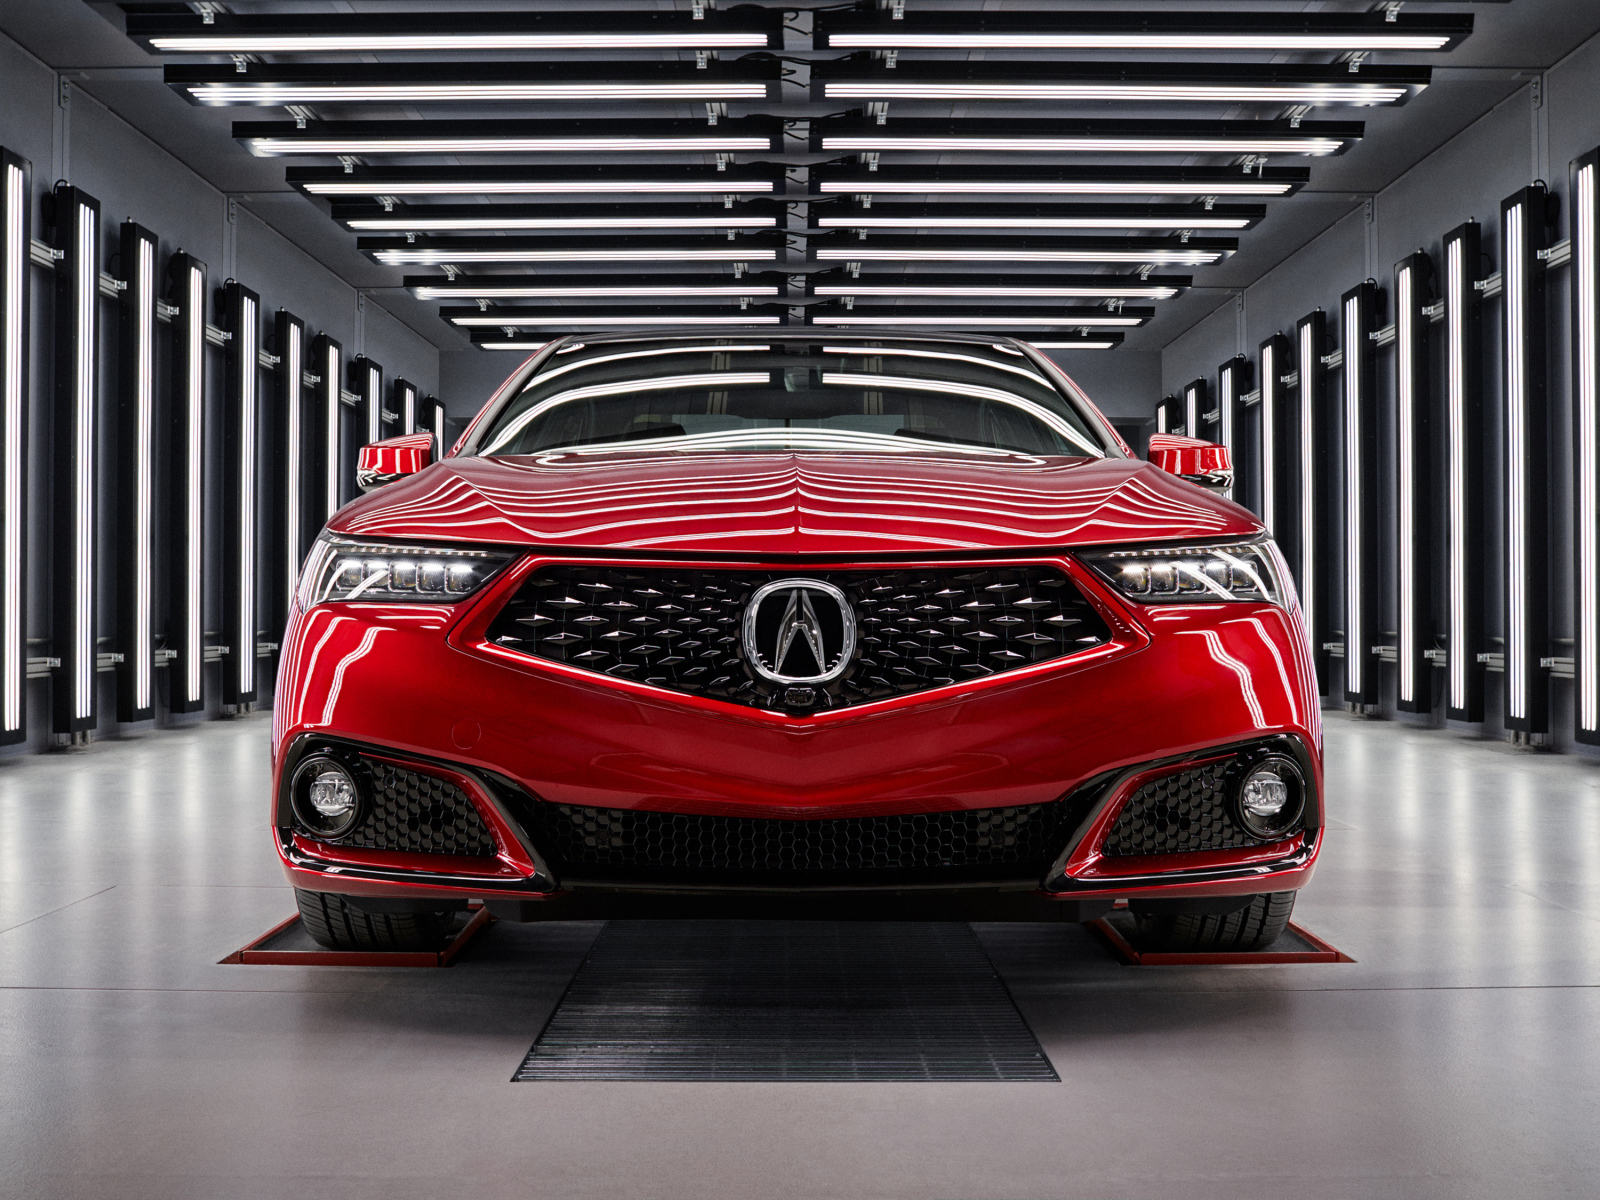 Acura TLX PMC 2020 Red Car